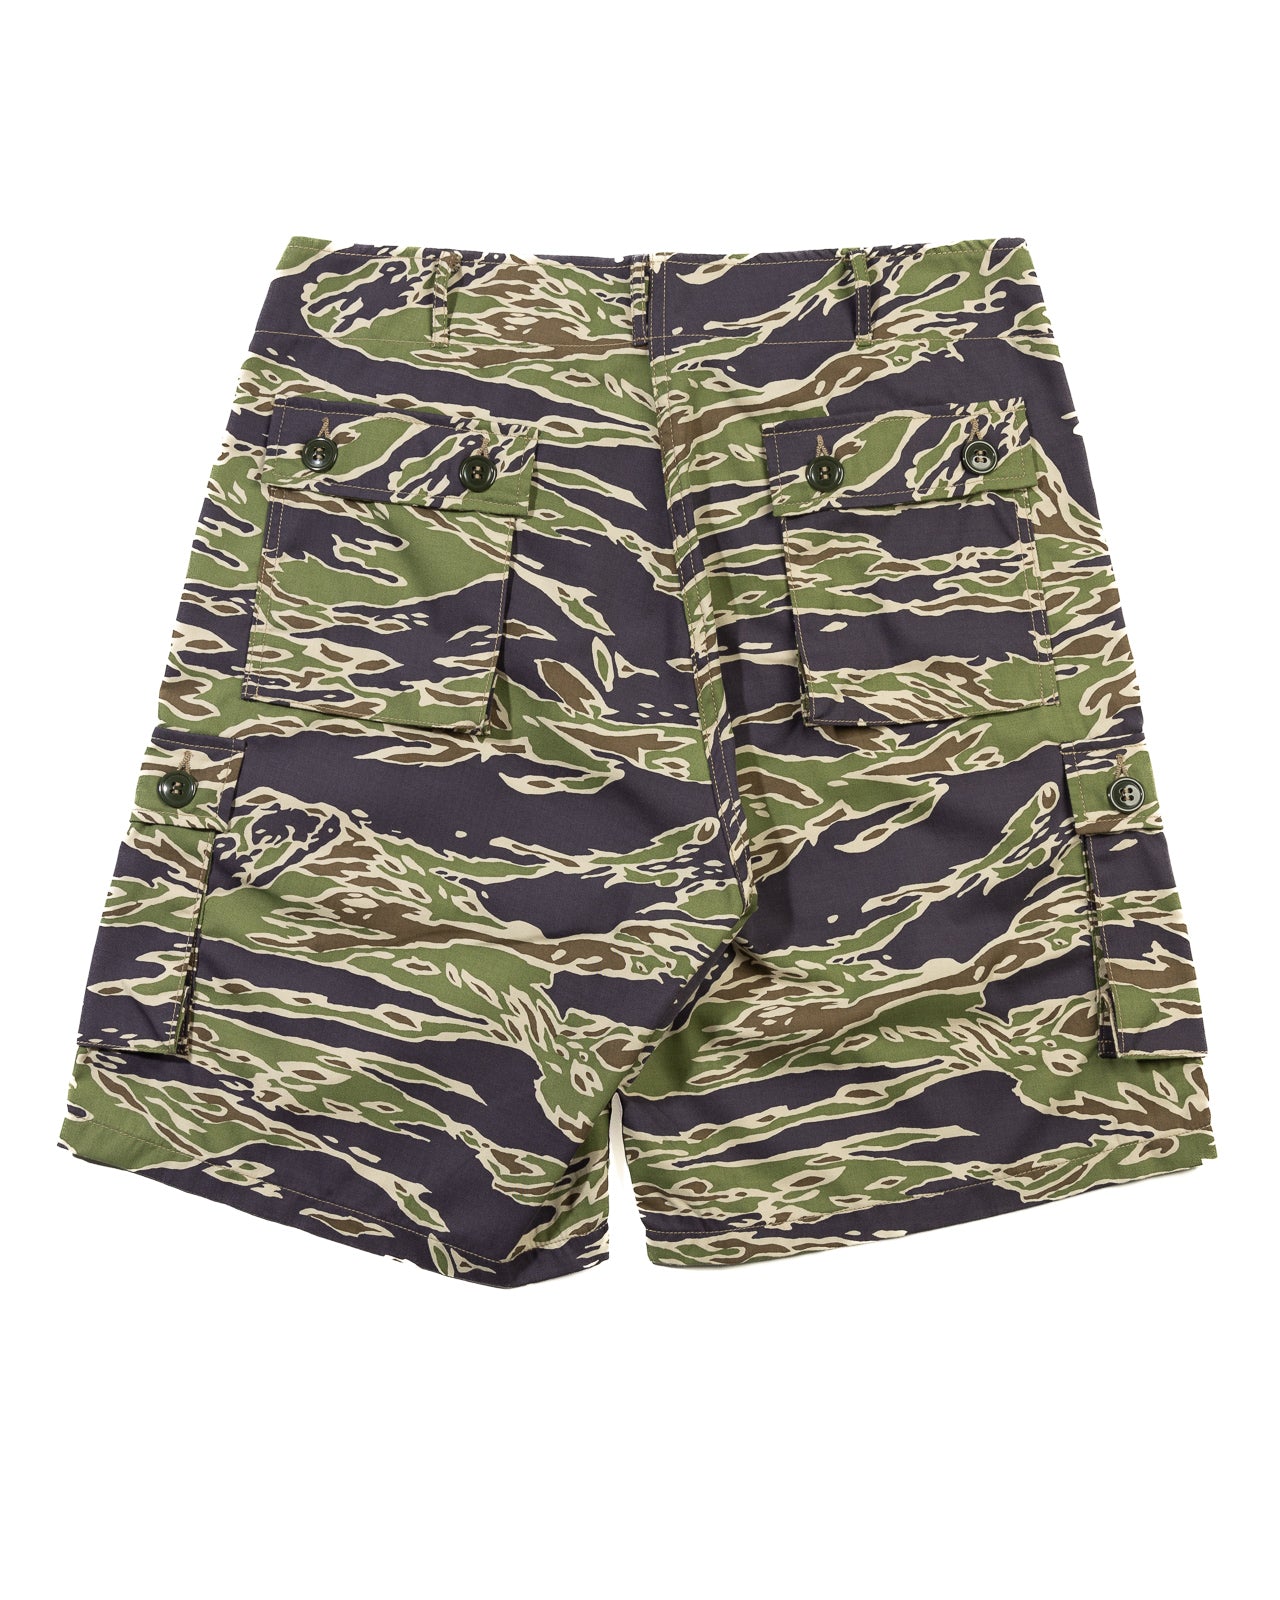 The Real McCoy's Tiger Camouflage Civilian Shorts - Late War Green